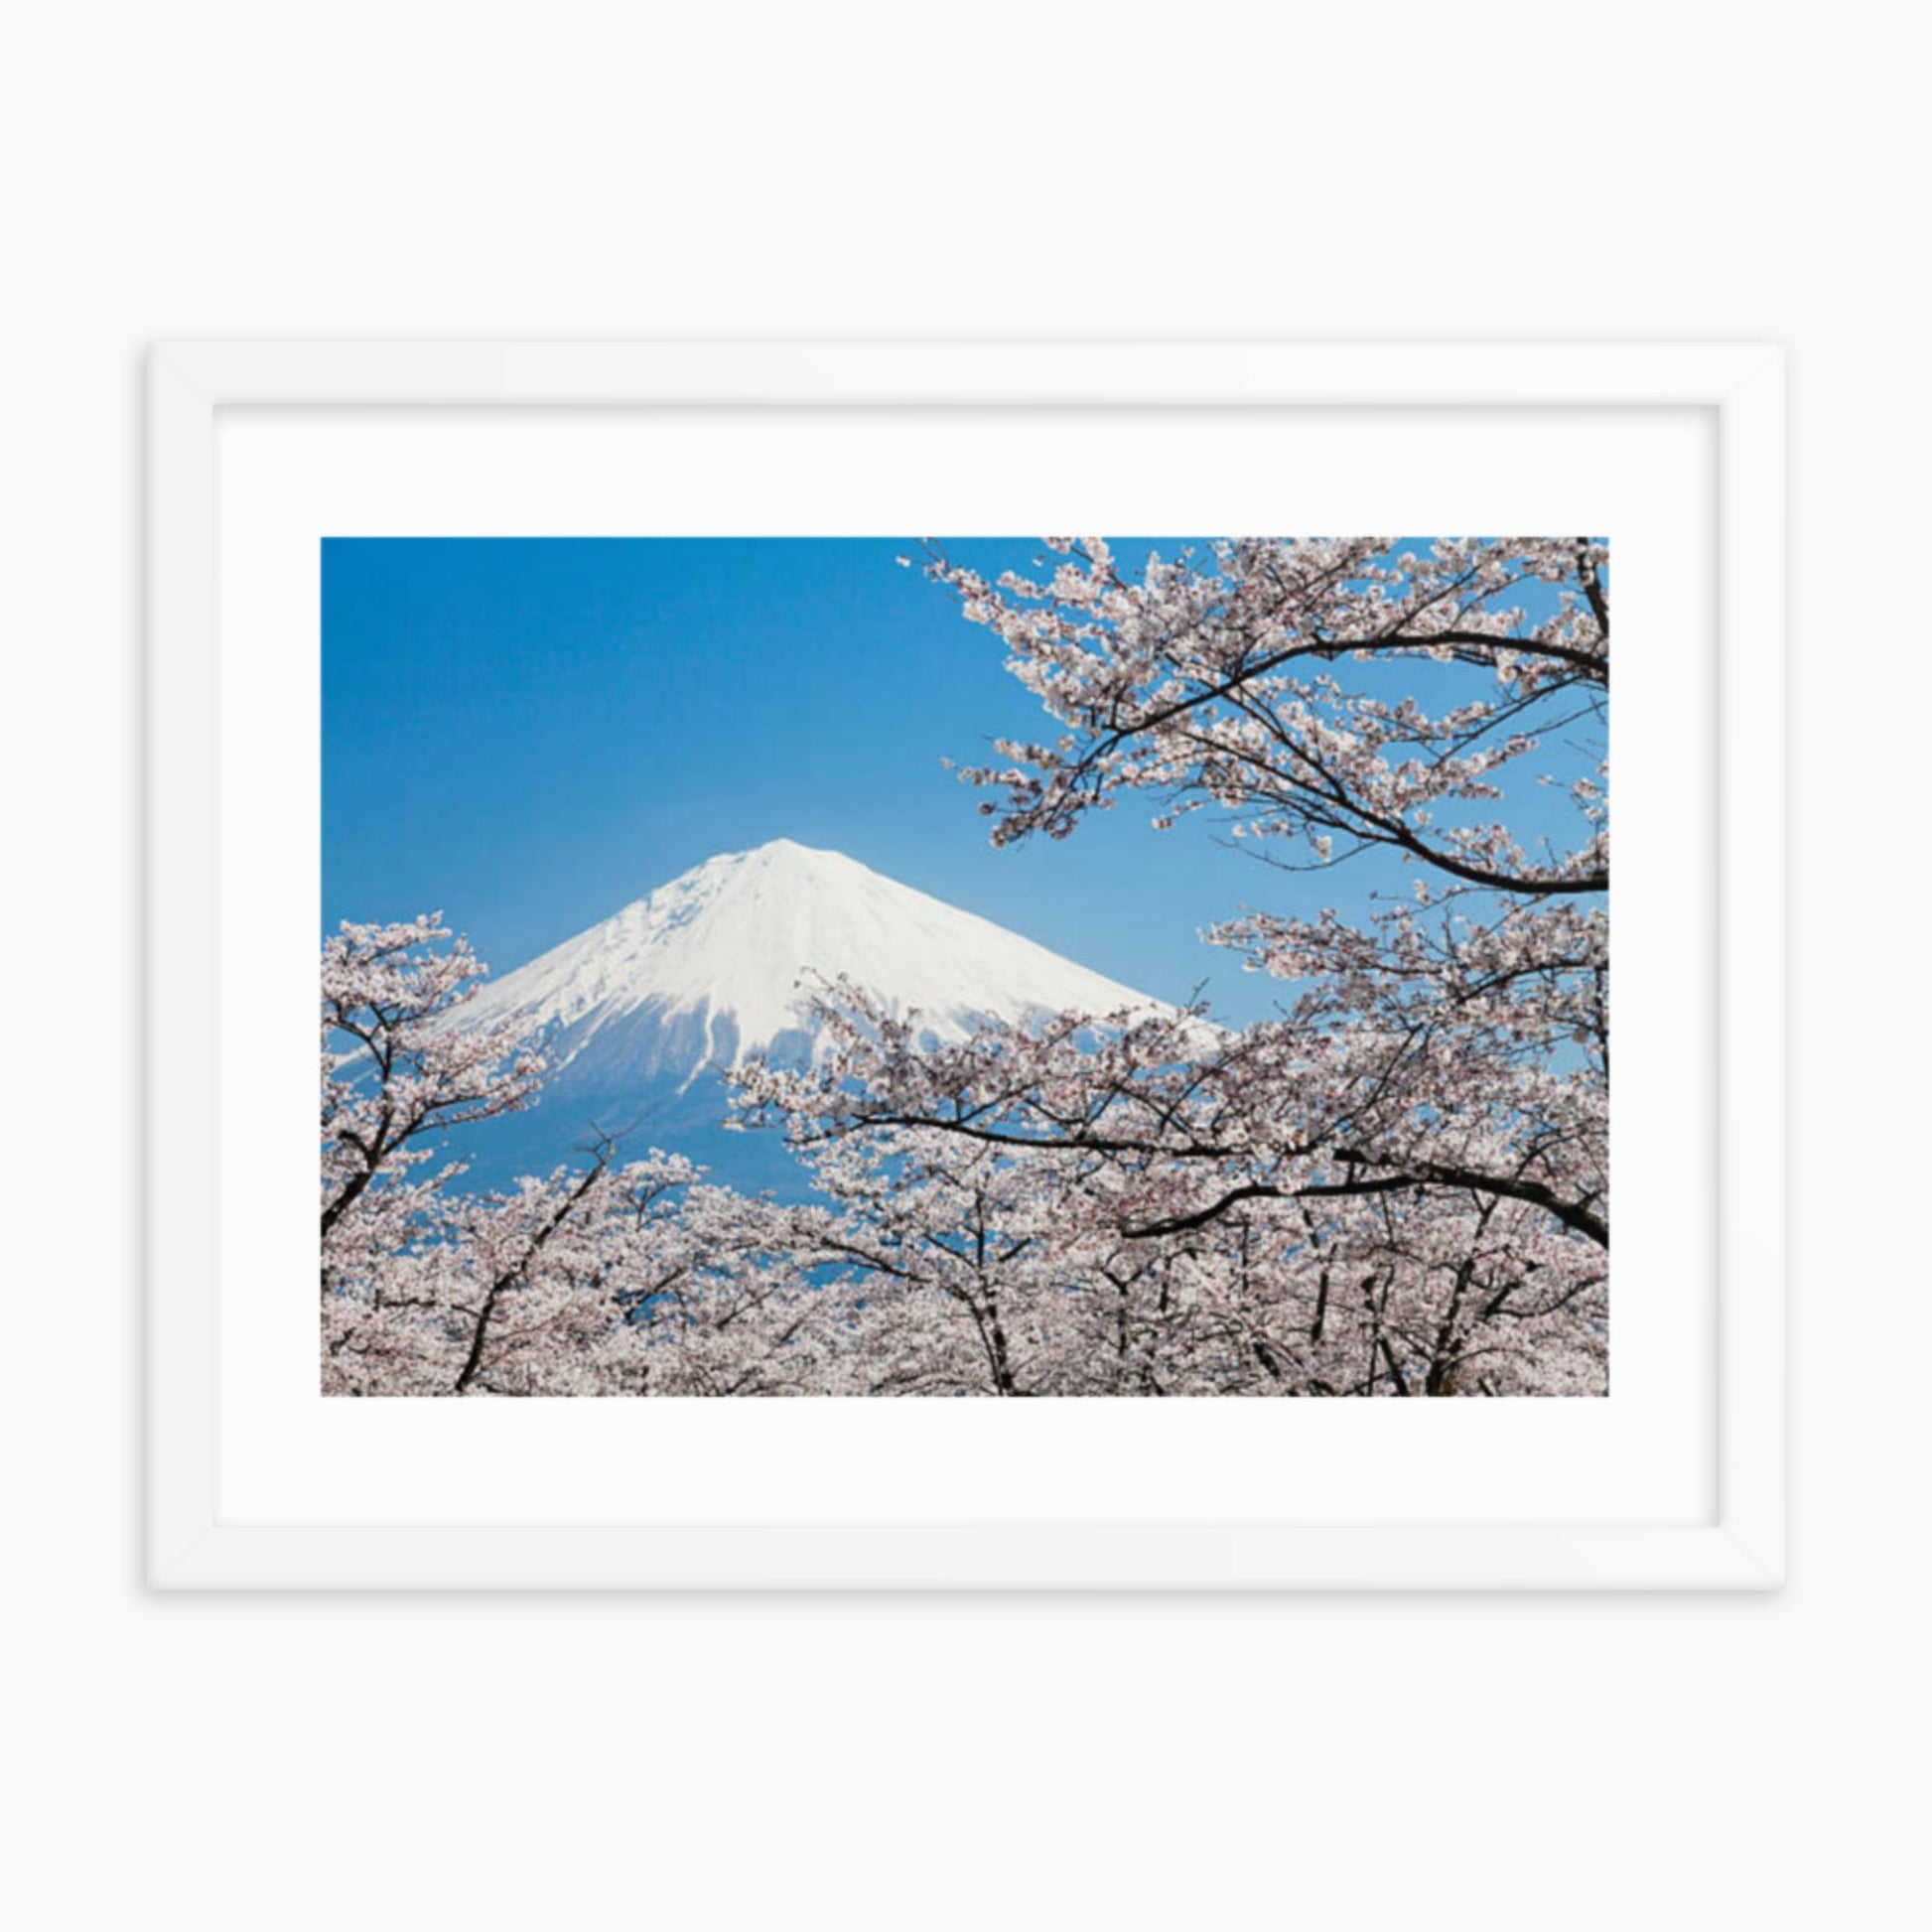 Mount Fuji & Cherry Blossoms 18x24 in Poster With White Frame